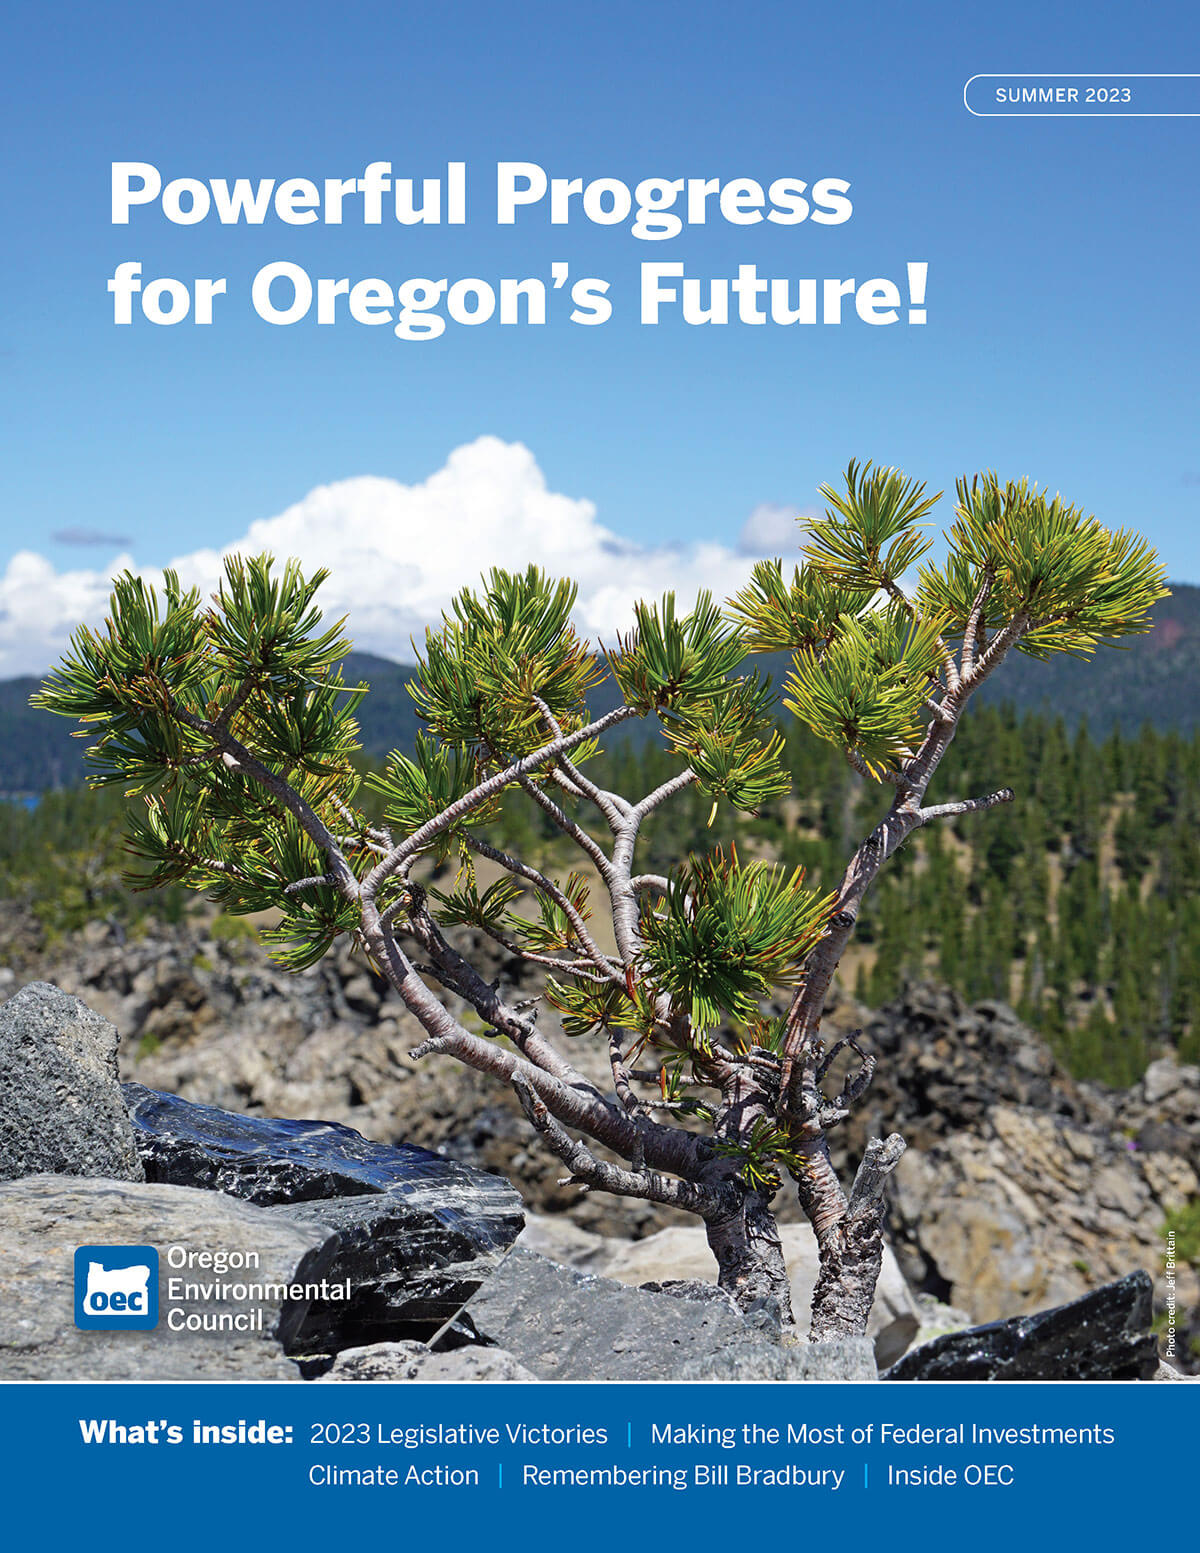 OEC 2023 Summer Newsletter Coverpage - including 2023 Legislative Victories, Making the most of federal investments, climate action, remembering Bill Bradbury, and inside oec.